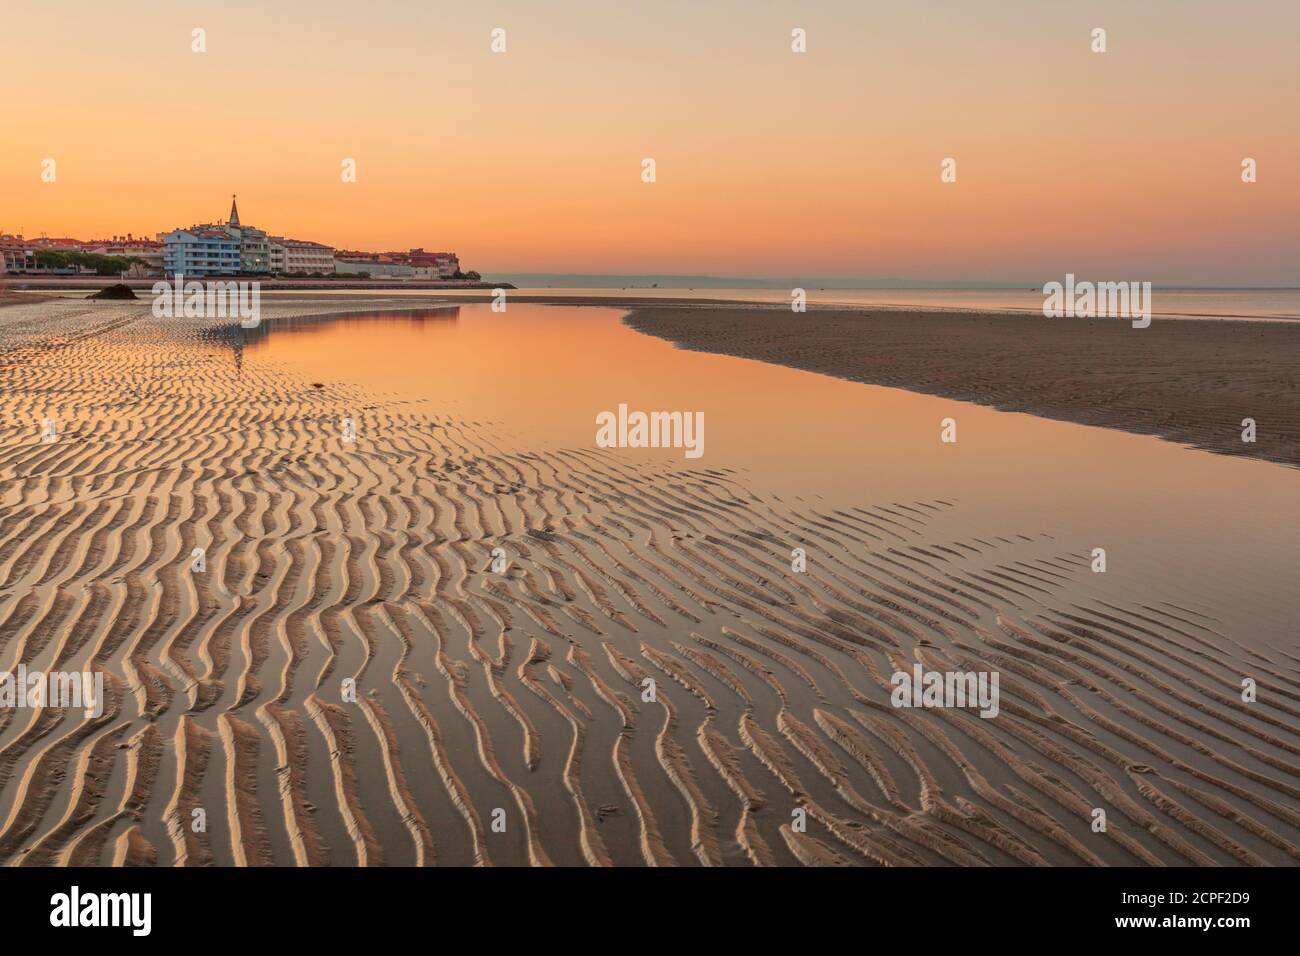 Colorful orange beach at sunset with ripple sand patterns from the receding tide and reflections on the water of the lagoon in a tranquil scenic Stock Photo